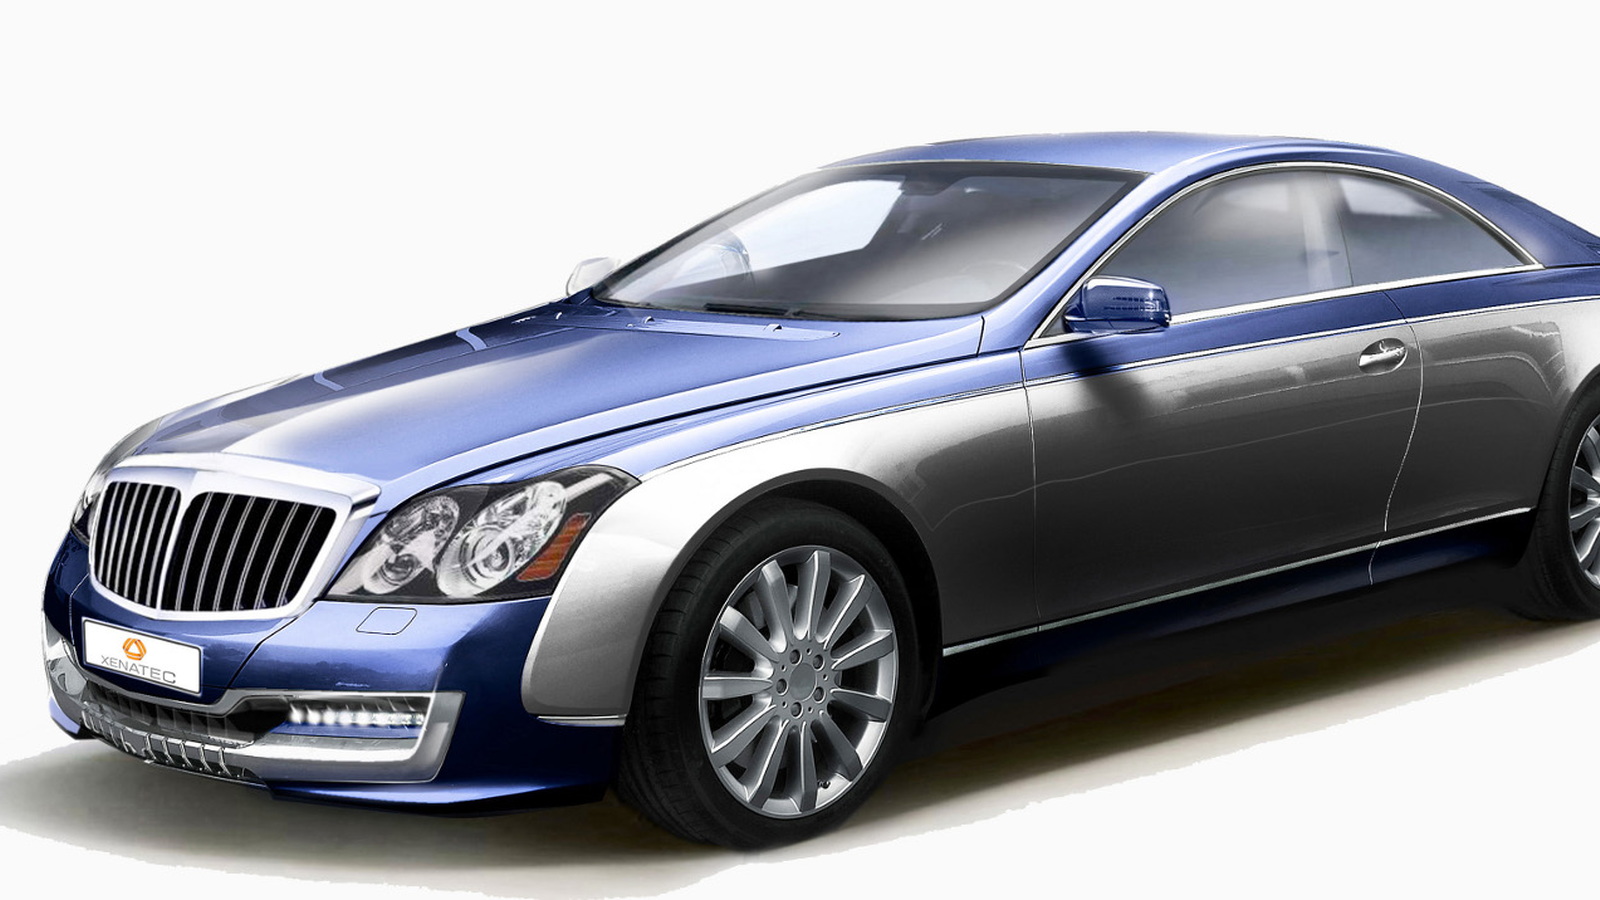 XENATEC Coupe based on the Maybach 57S.